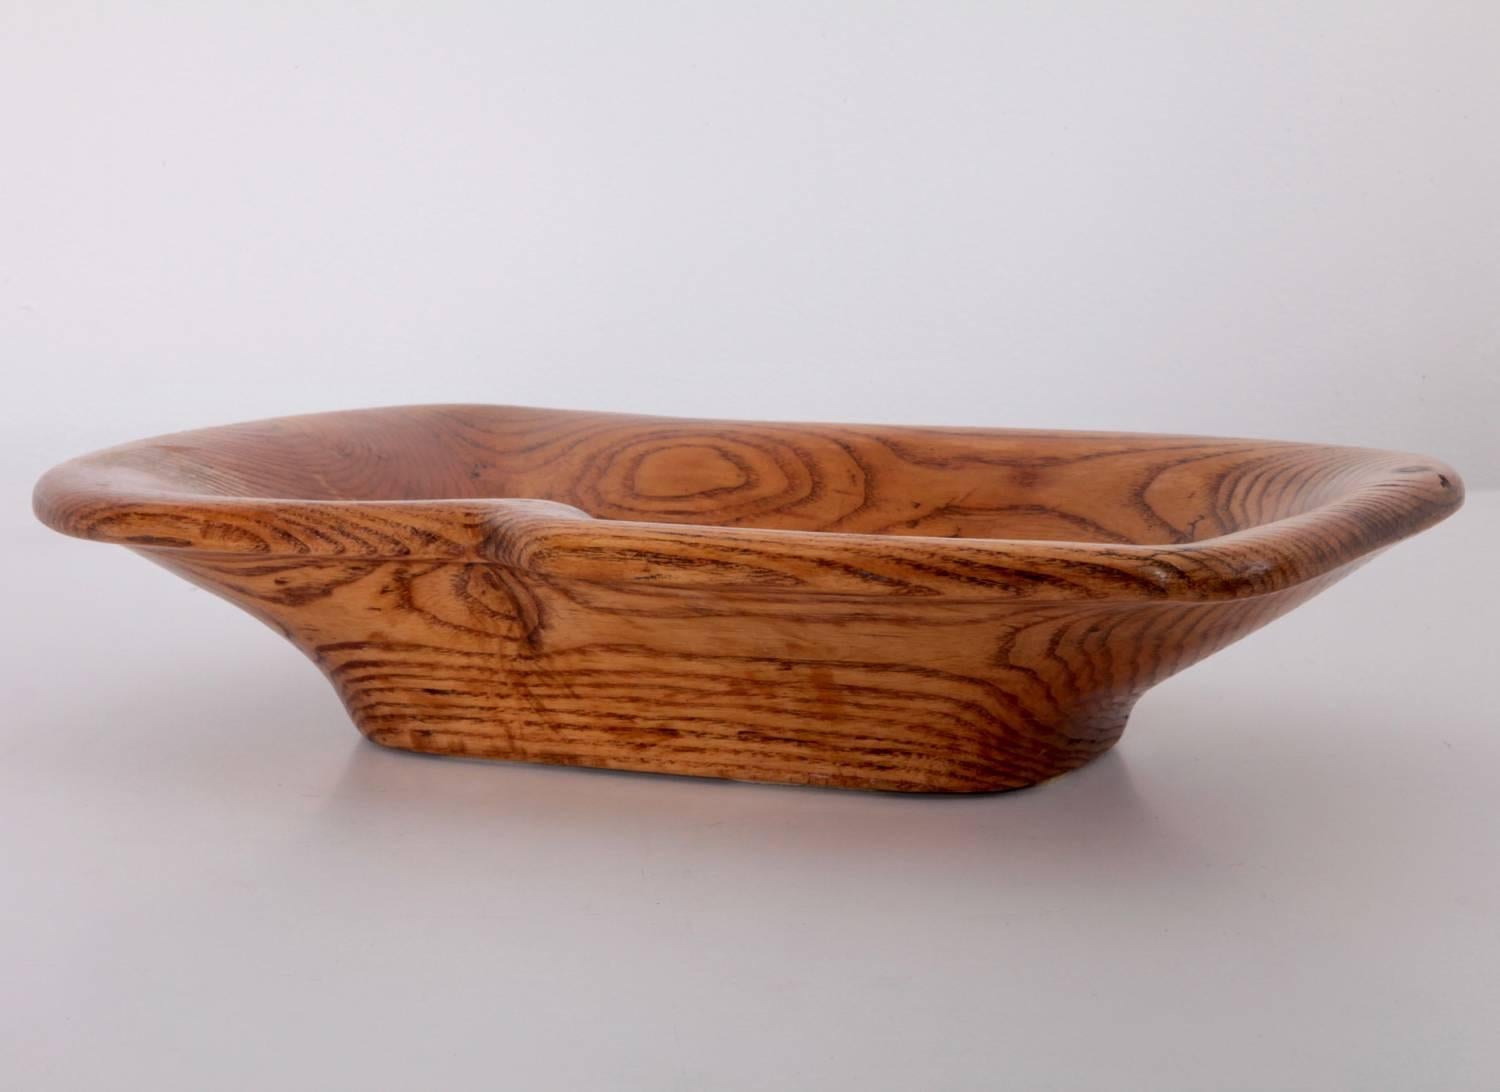 Nice vintage bowl with a beautiful patina in solid ashwood.

